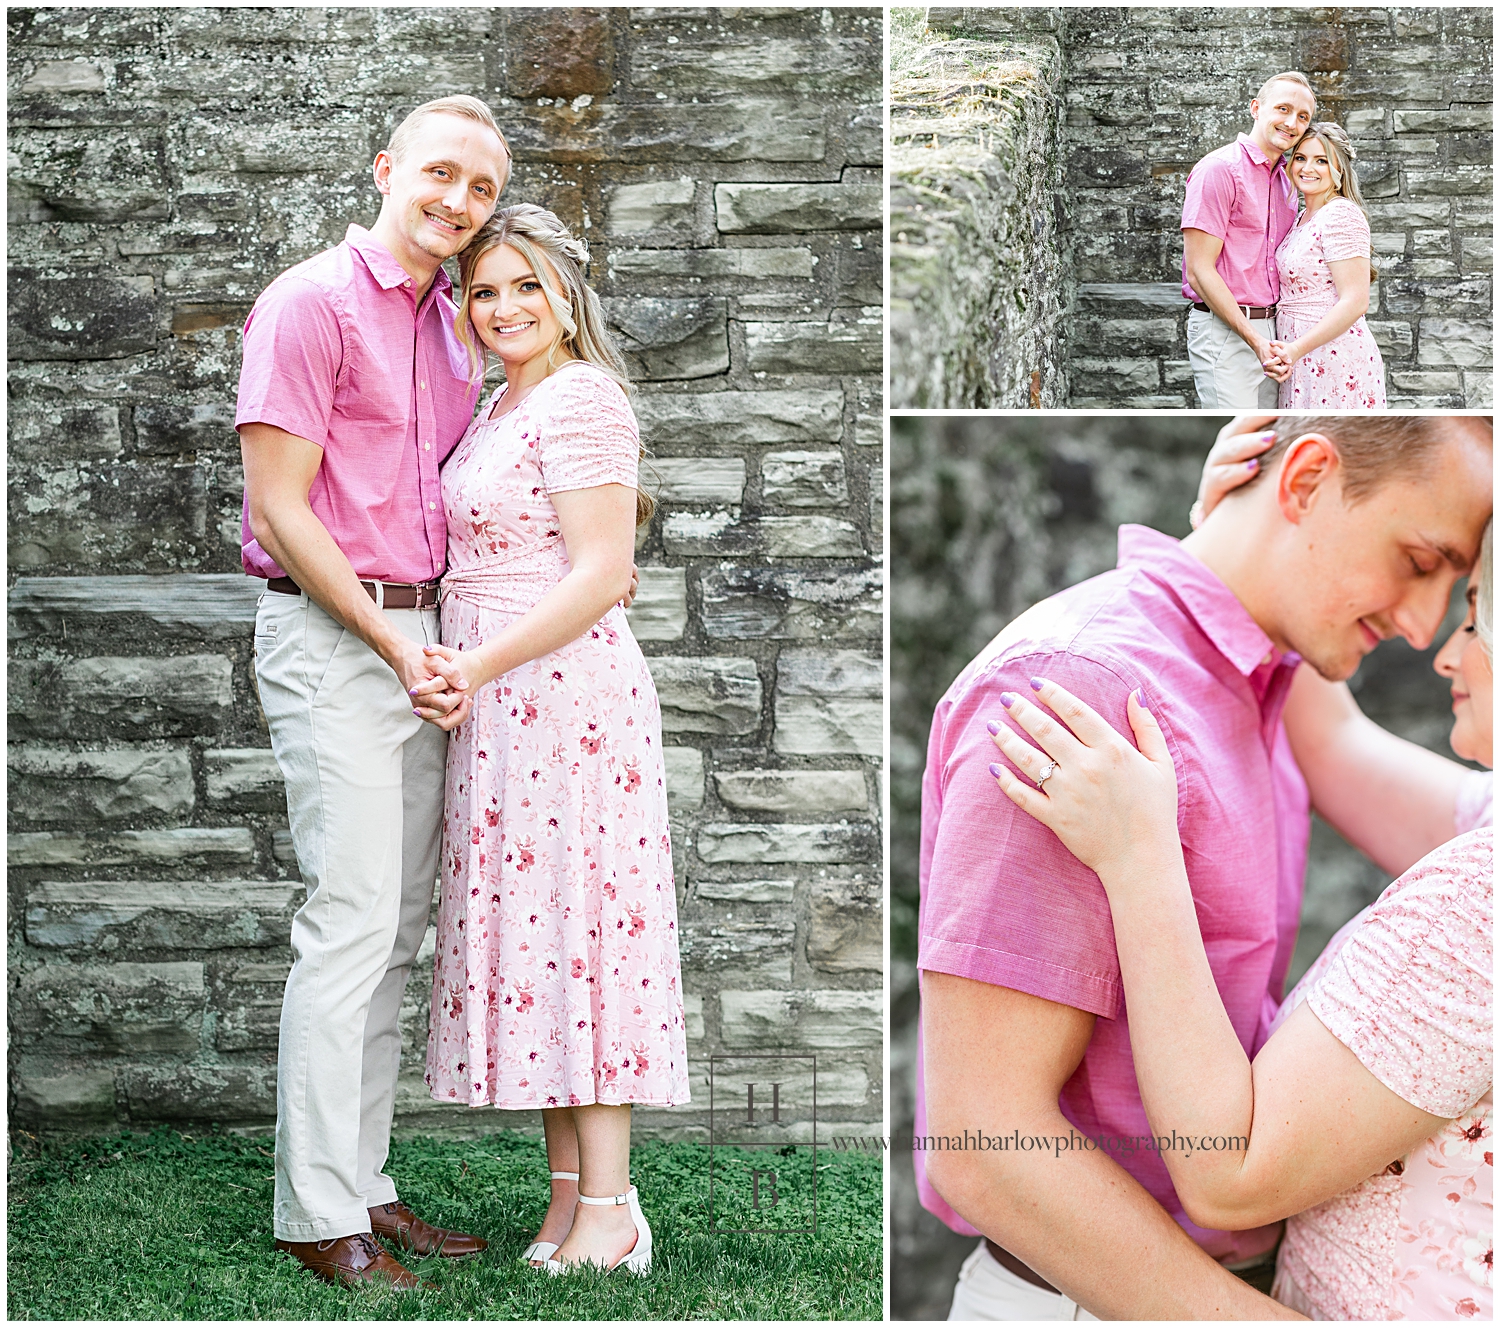 Couple dressed in pink stands by stone wall and poses for engagement photos.